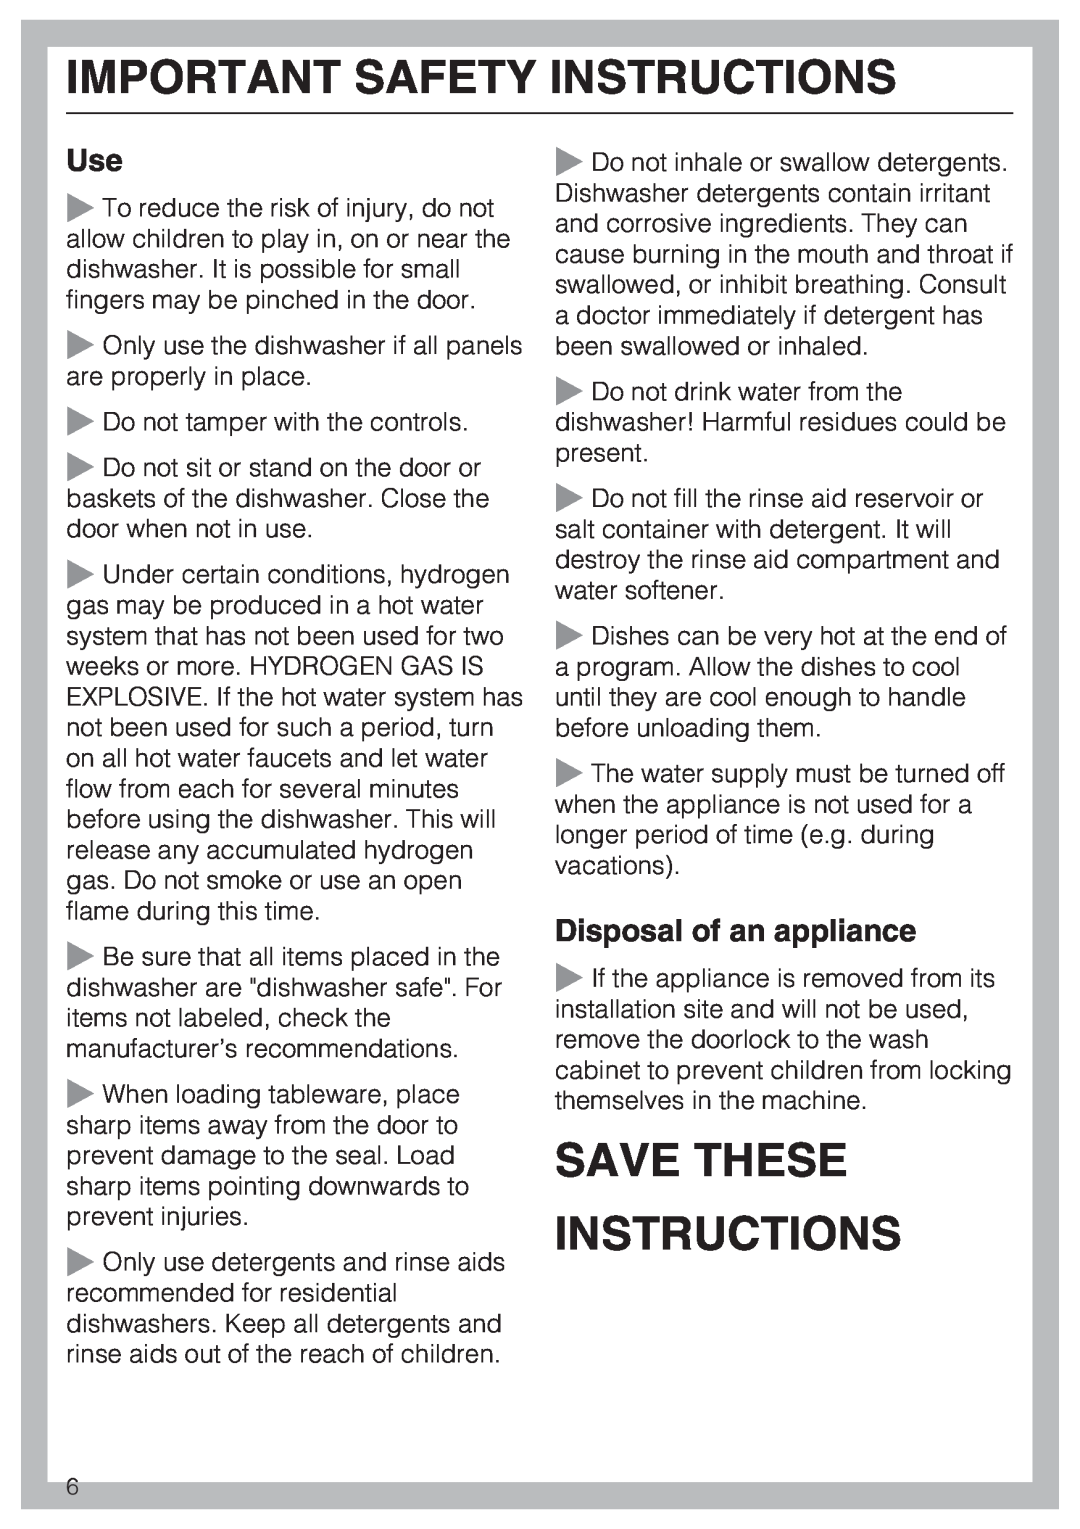 Miele G 5225, G 5220 operating instructions Save These Instructions, Disposal of an appliance, Important Safety Instructions 